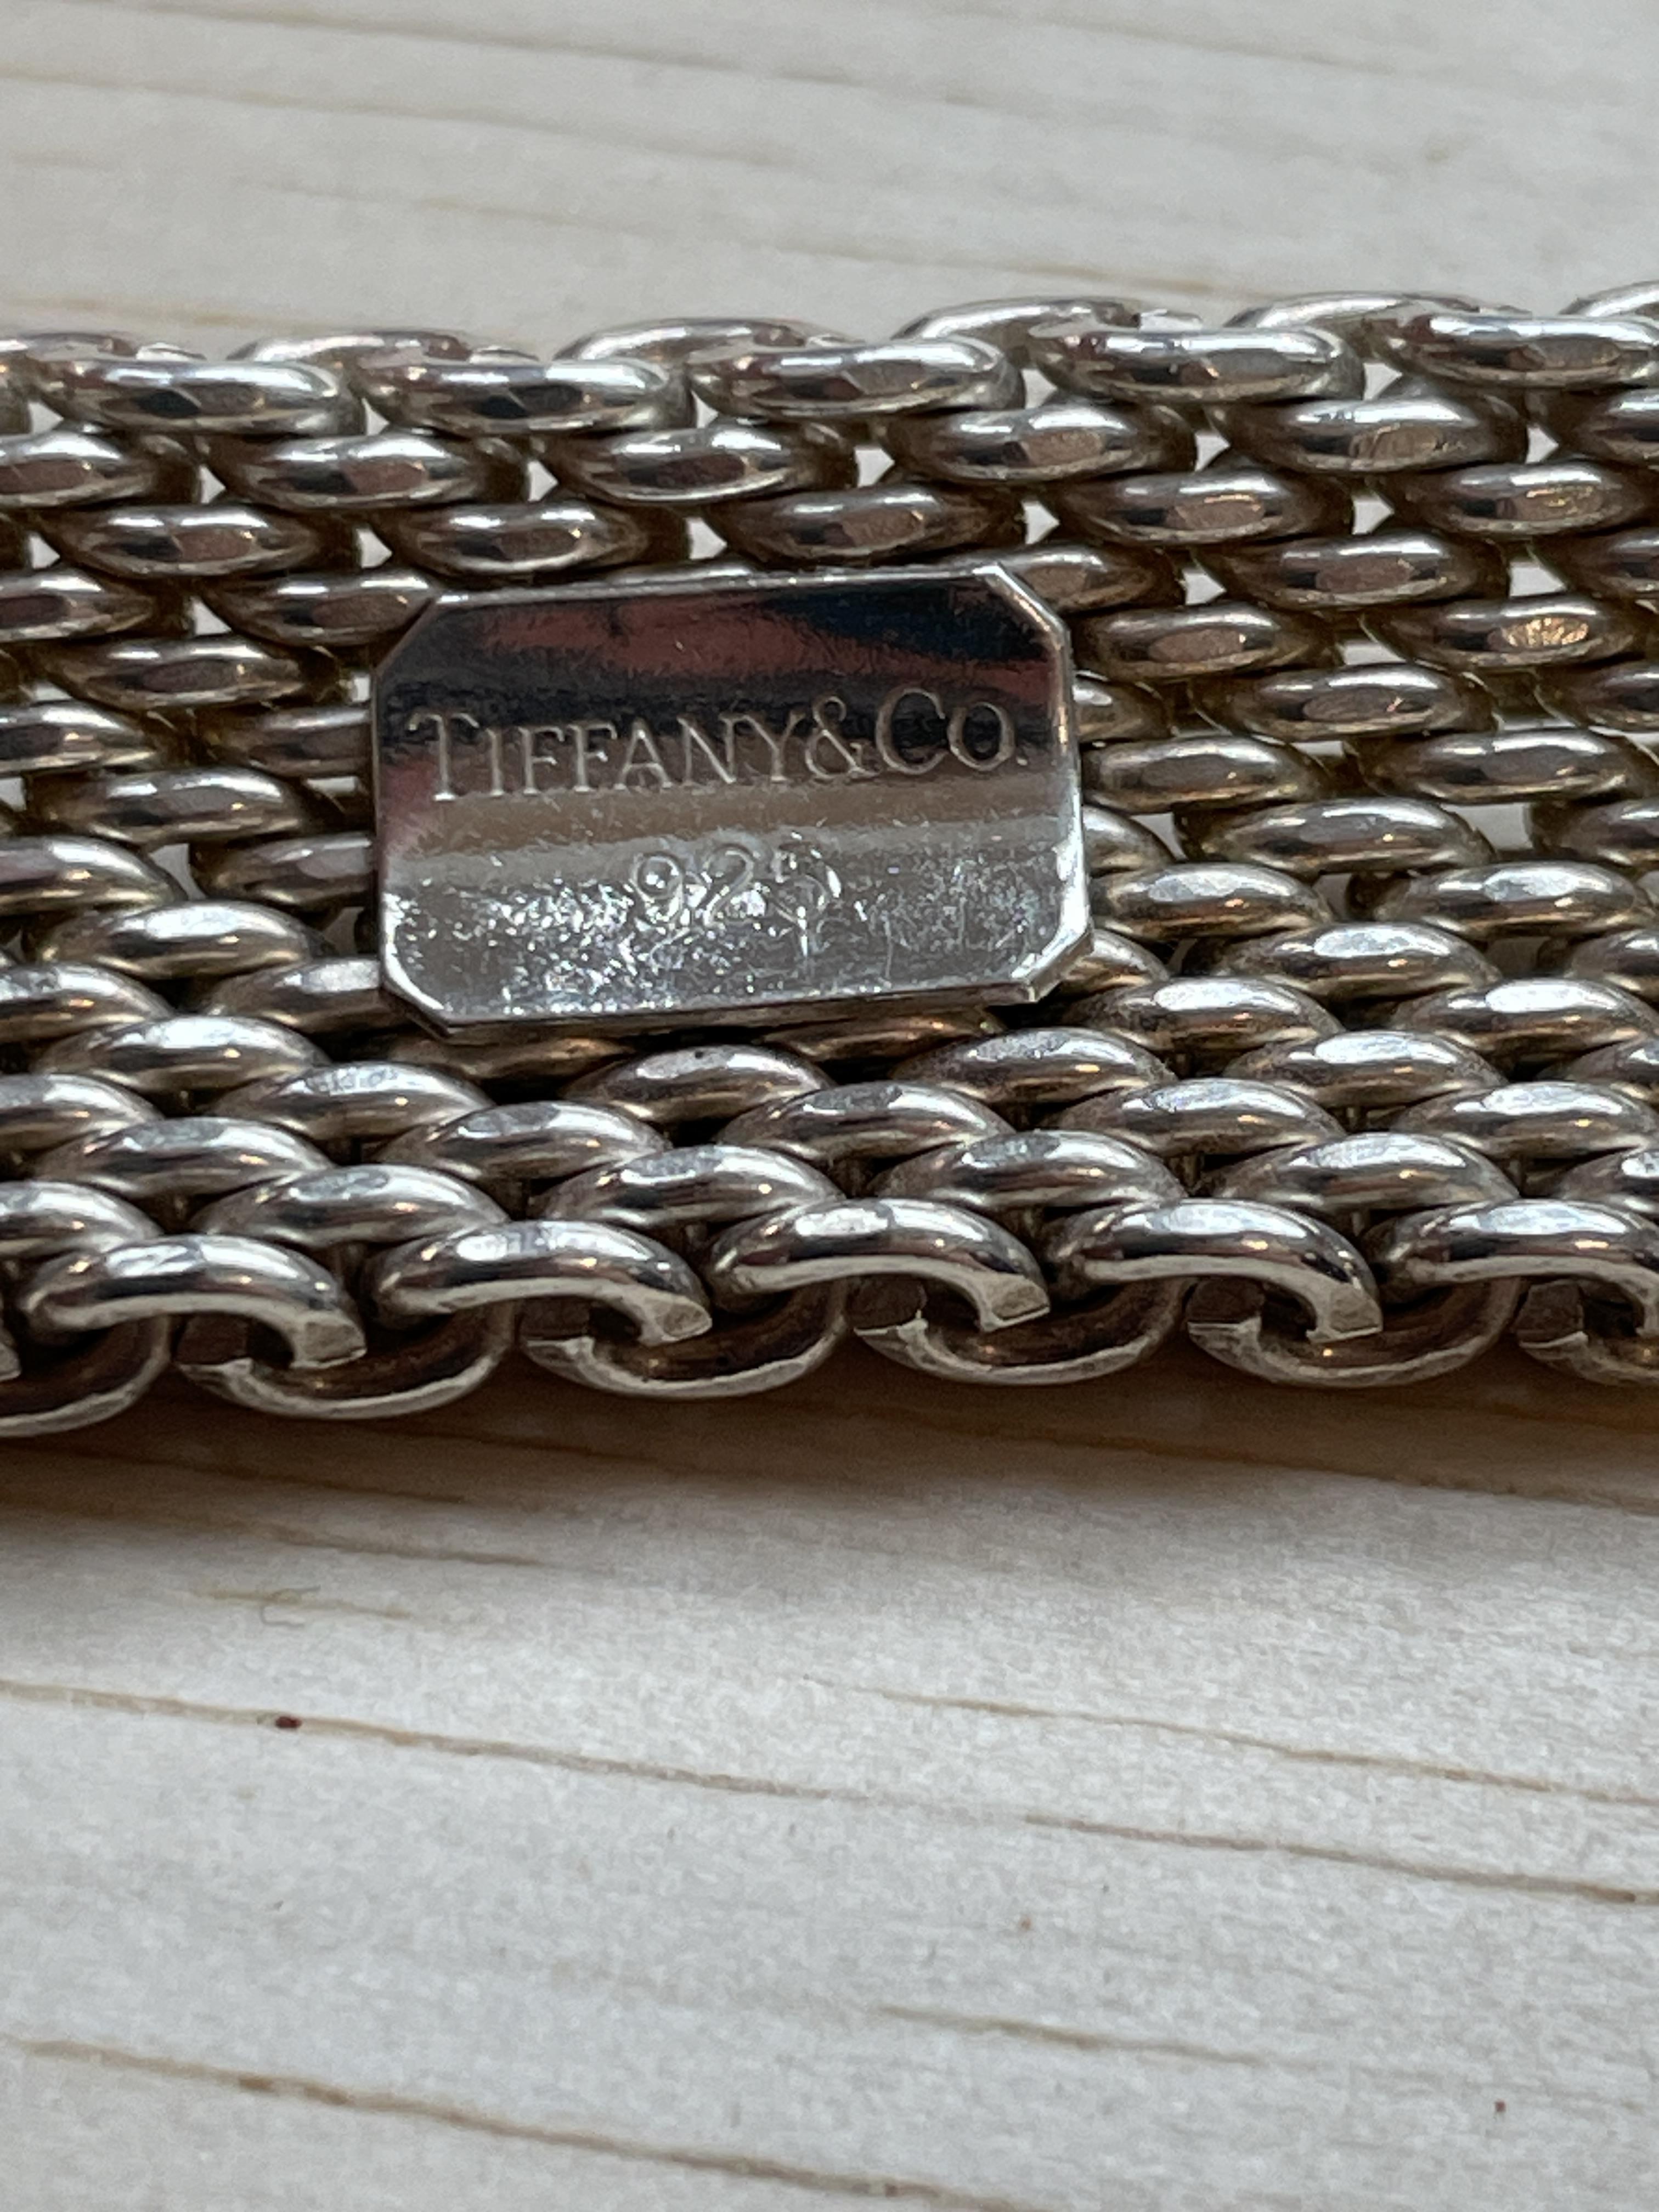 A TIFFANY & CO. SILVER MESH BRACELET AND RING - Image 5 of 7